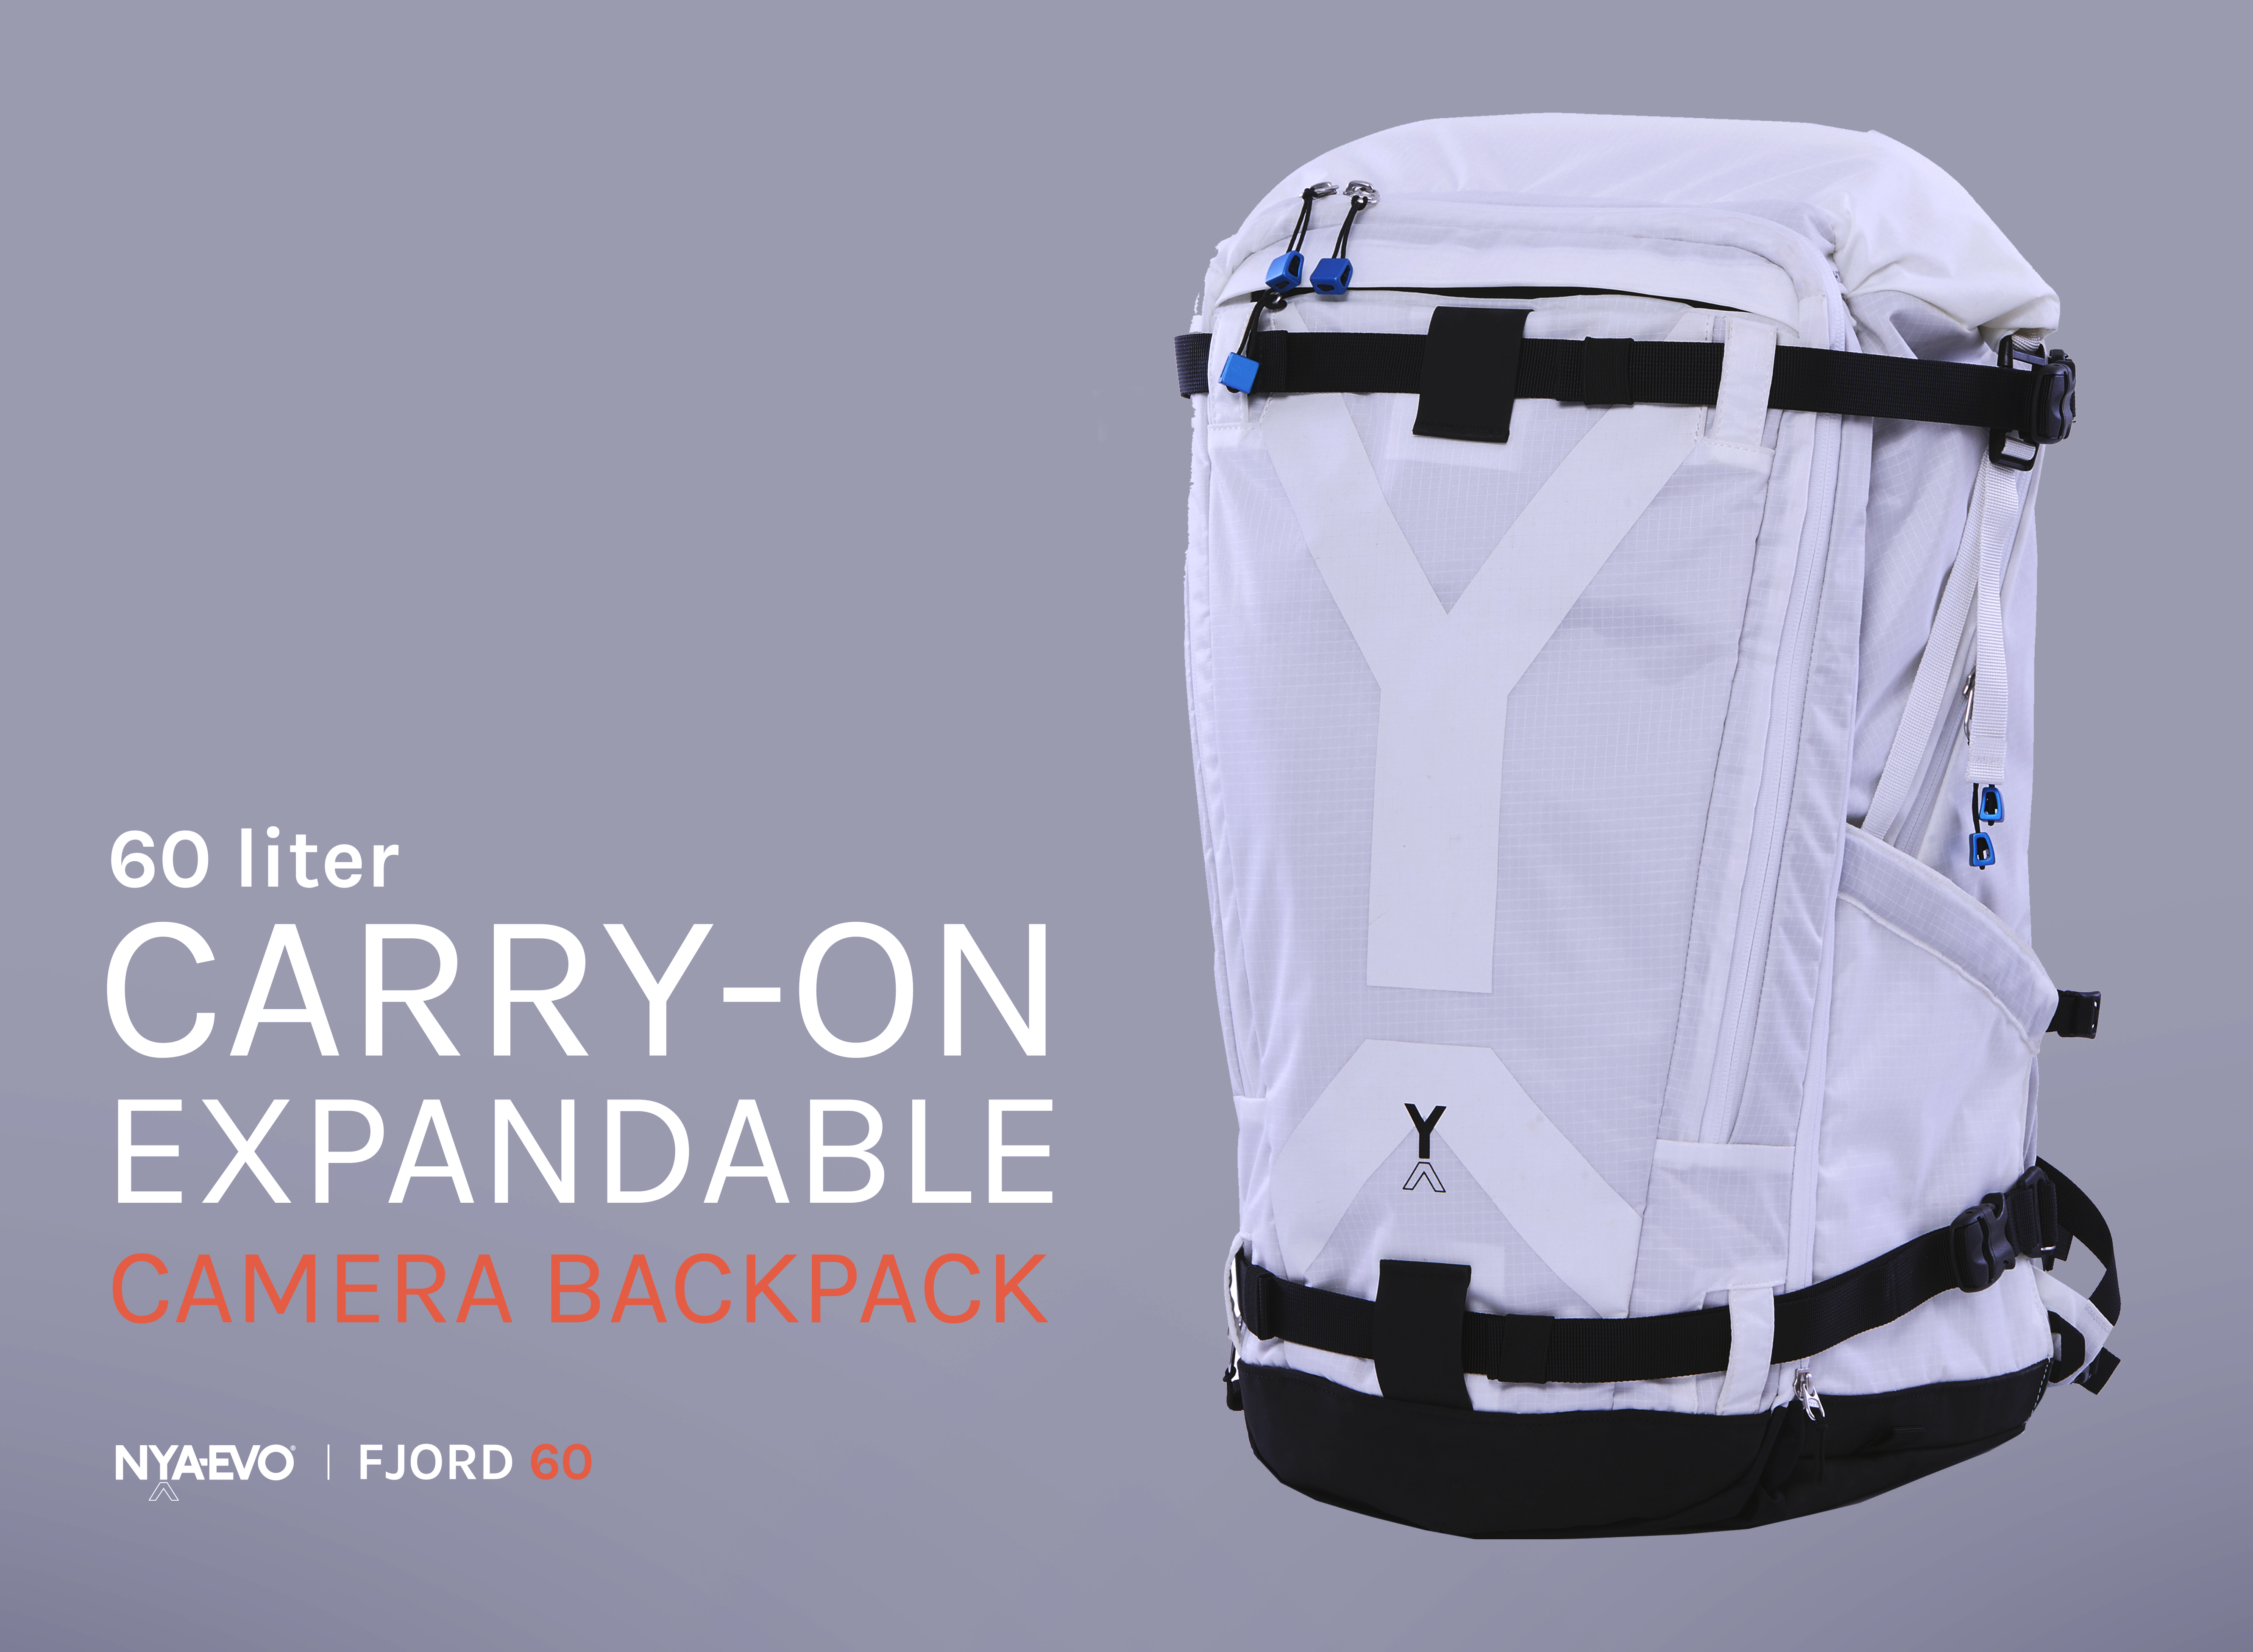 NYA-EVO Introduces the FJORD 60-C Adventure Camera Backpack for Longer Journeys